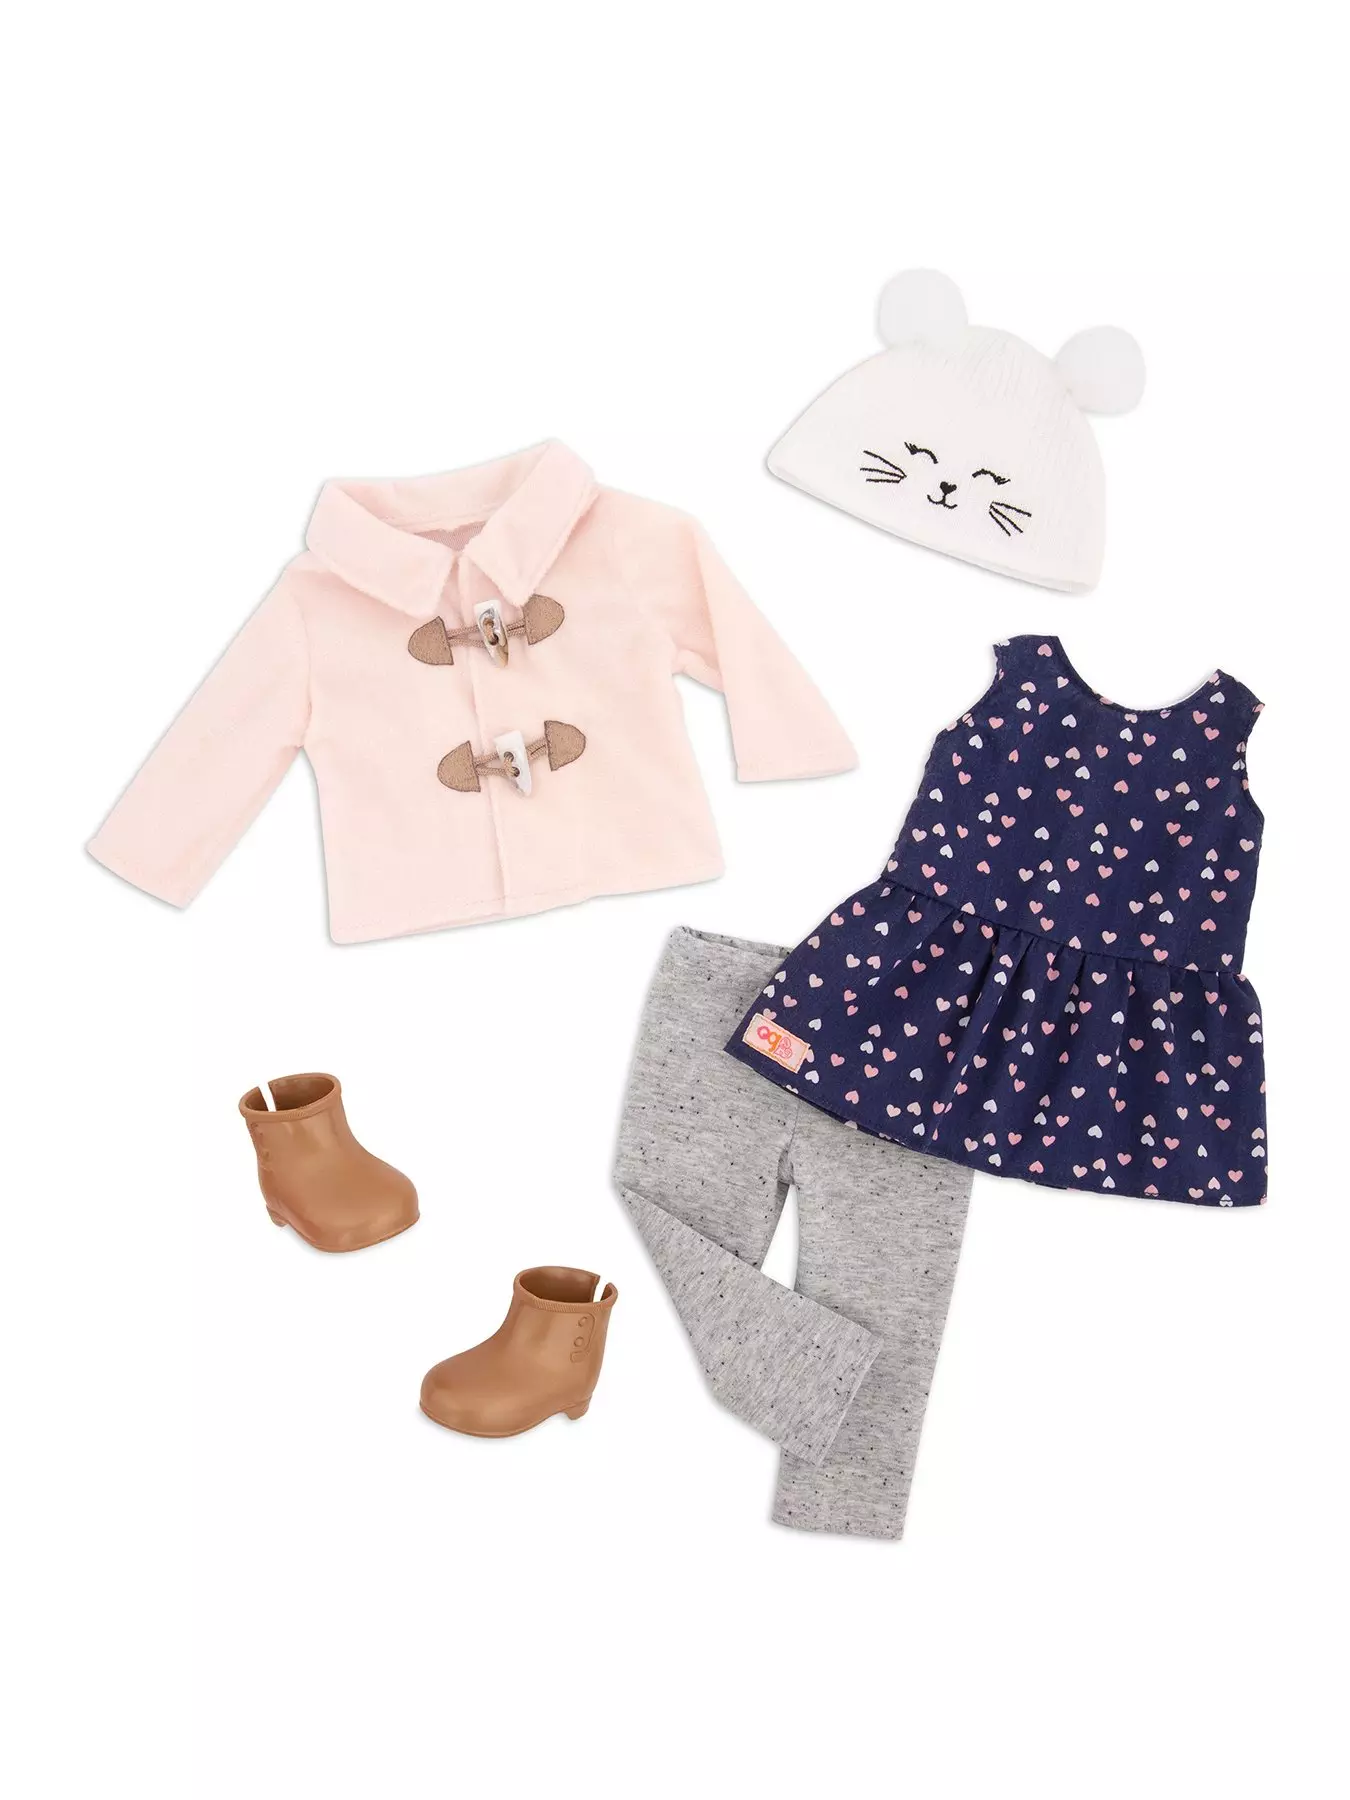 Our Generation Doll Clothes -  UK